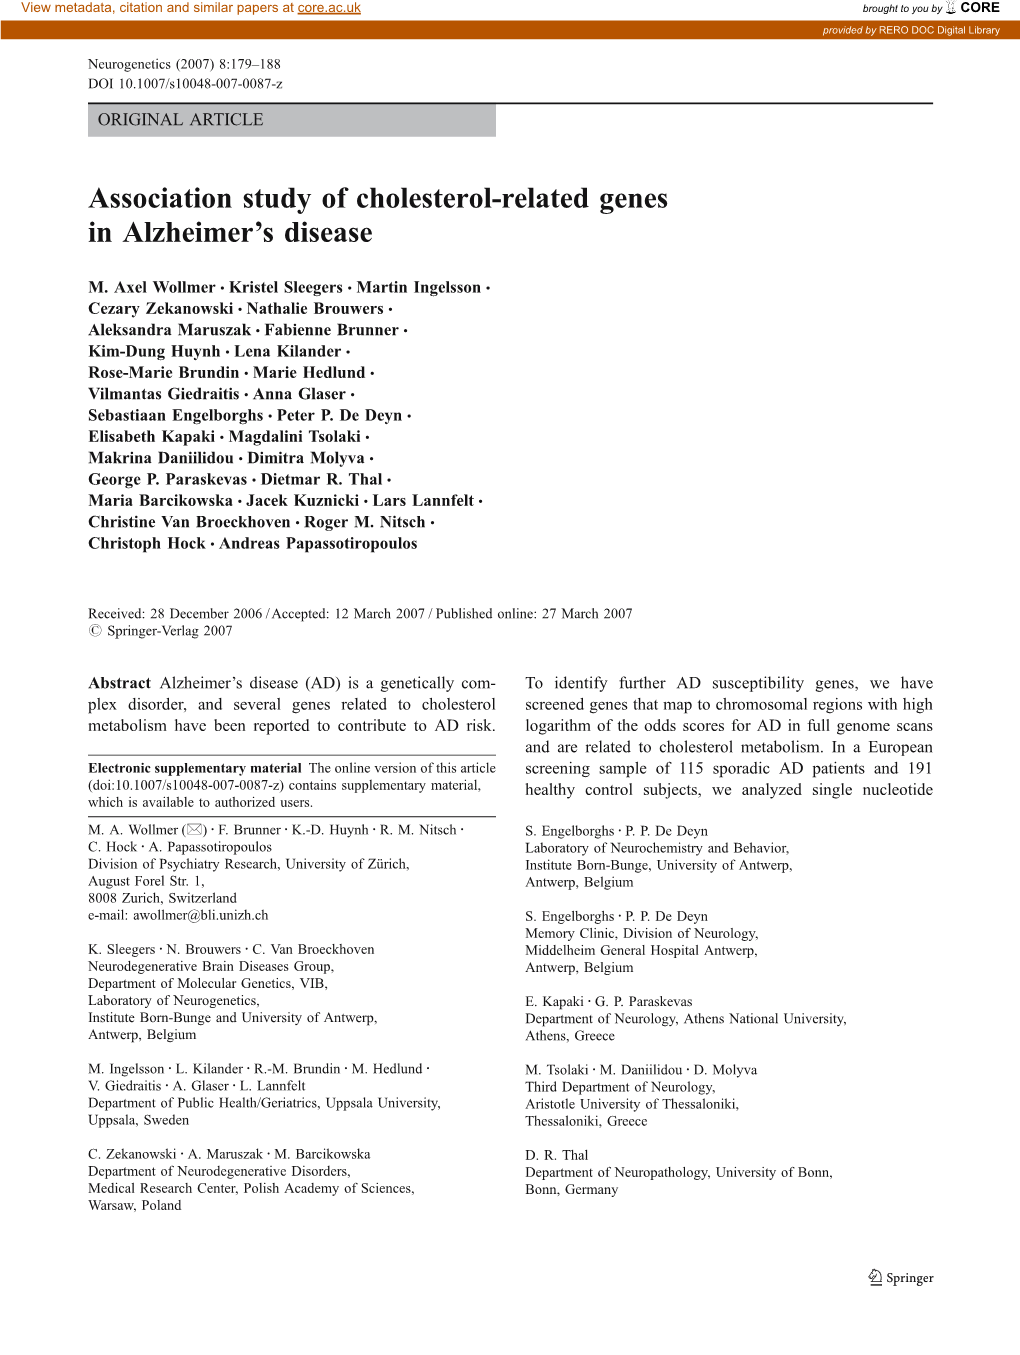 Association Study of Cholesterol-Related Genes in Alzheimer’S Disease